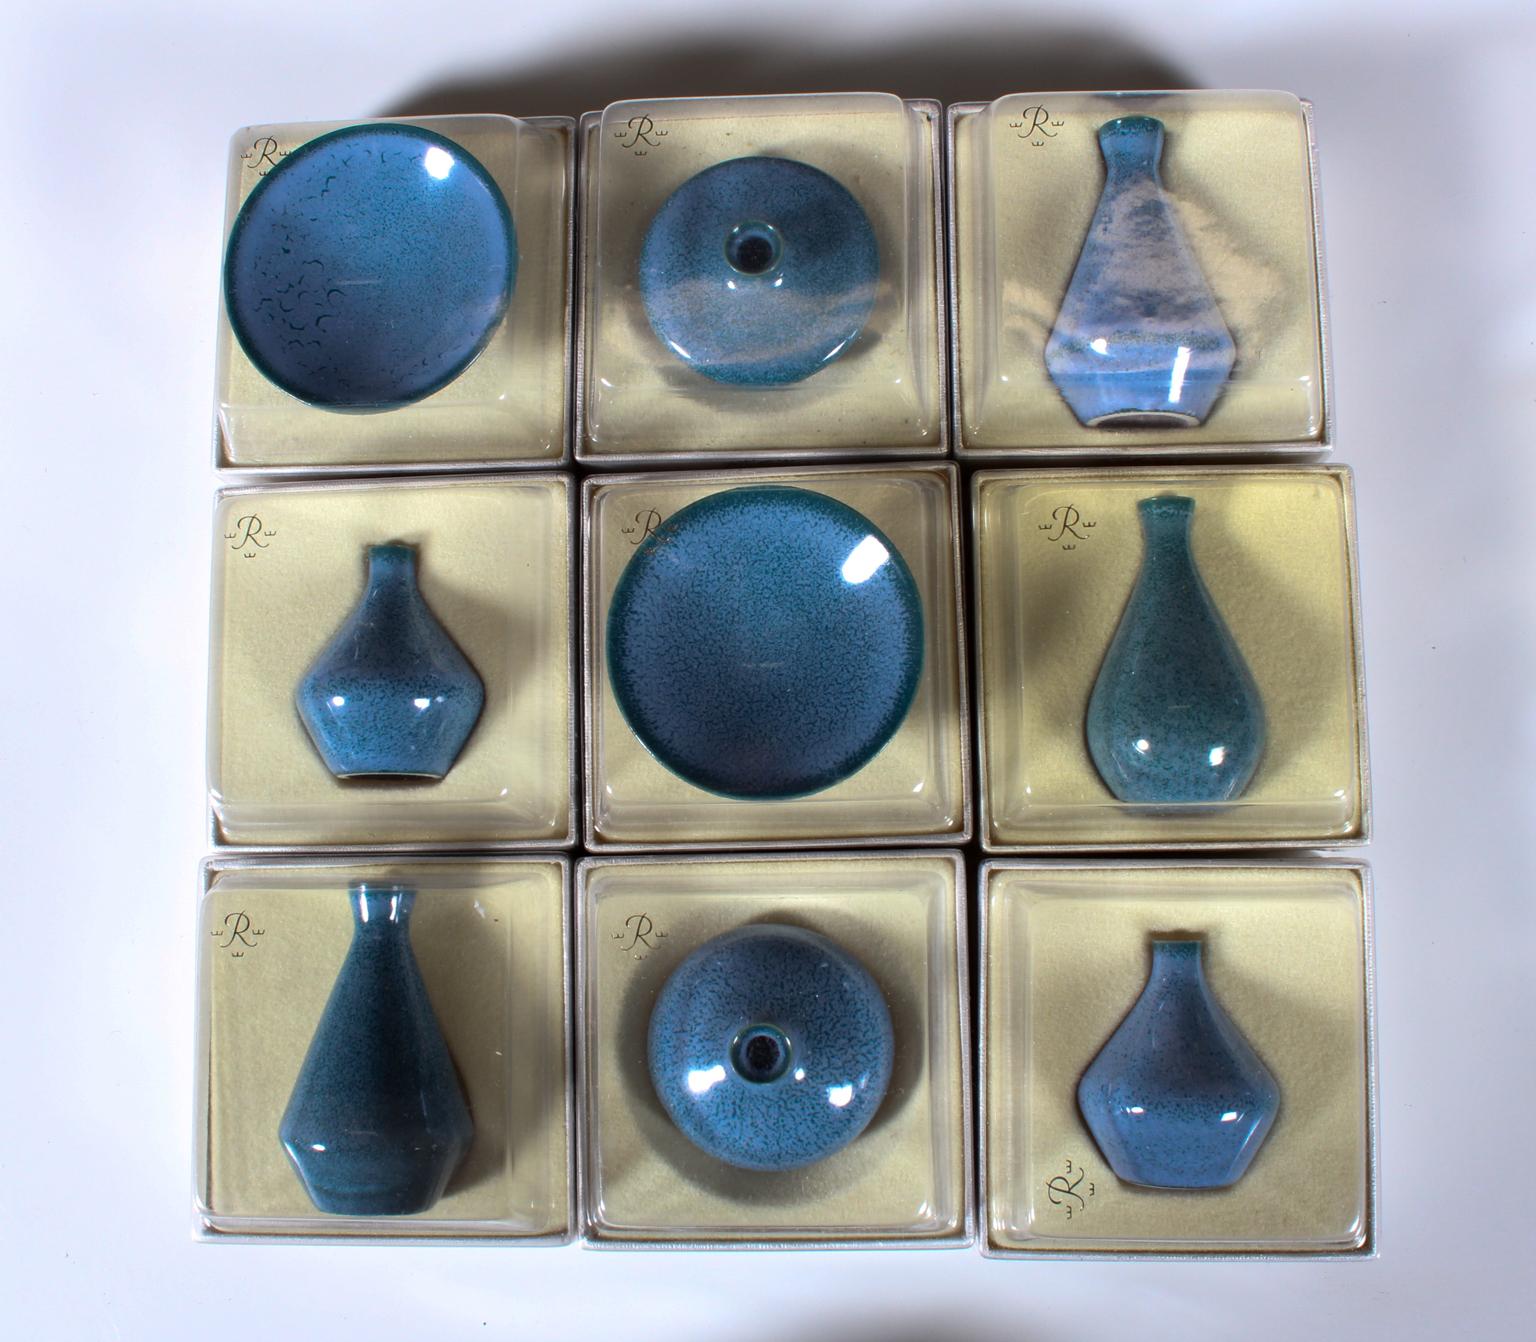 Bertil Lundgren miniature vases in glazed ceramic.

Made by Rörstrand

Height from 3-7.5 cm. Ø. 4.5-7 cm.

Comes with original boxes.